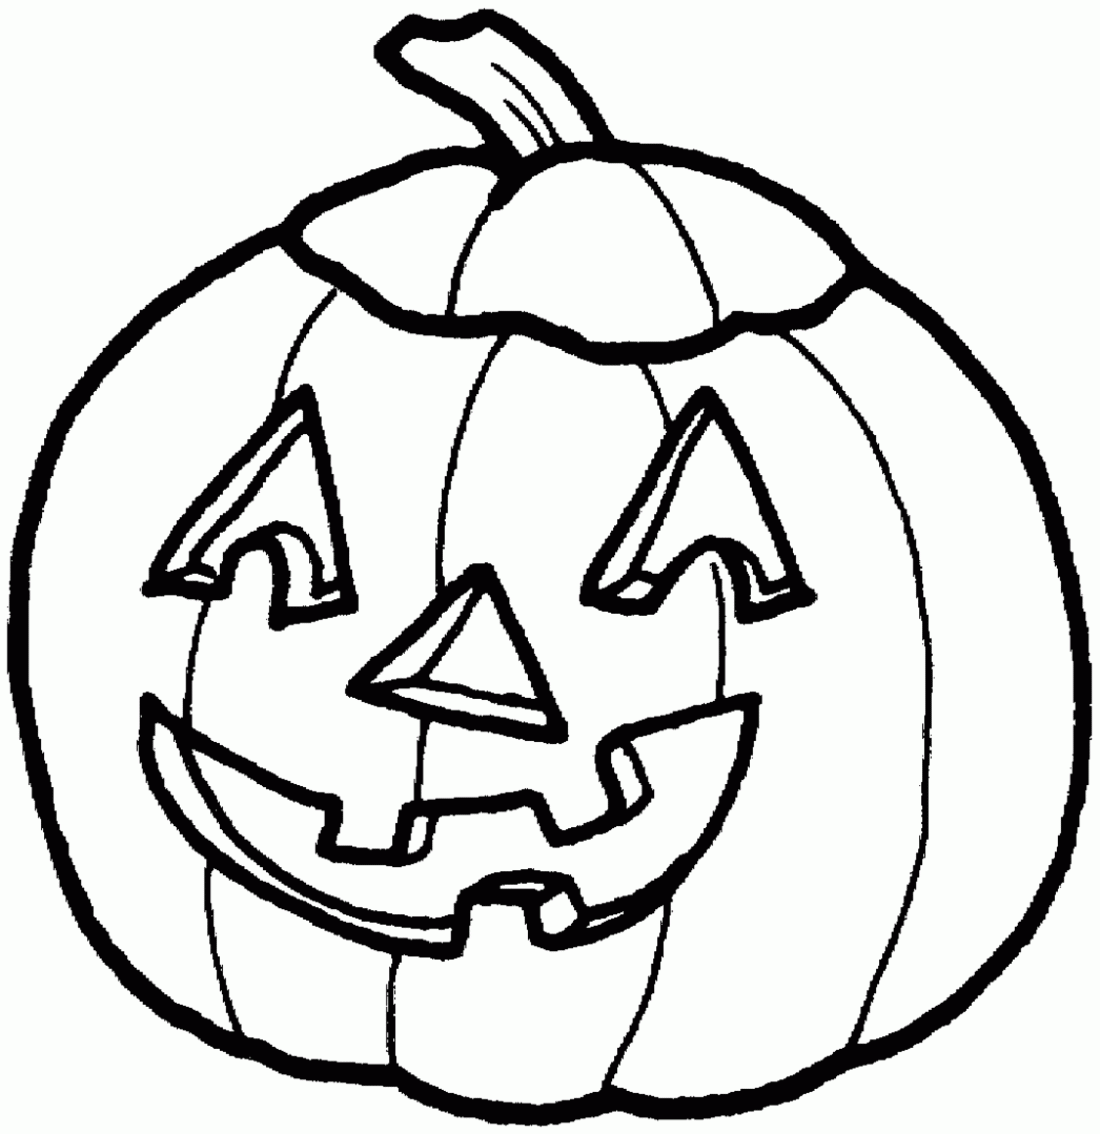 pumpkin color pages printable free printable pumpkin coloring pages for kids color pumpkin printable pages 